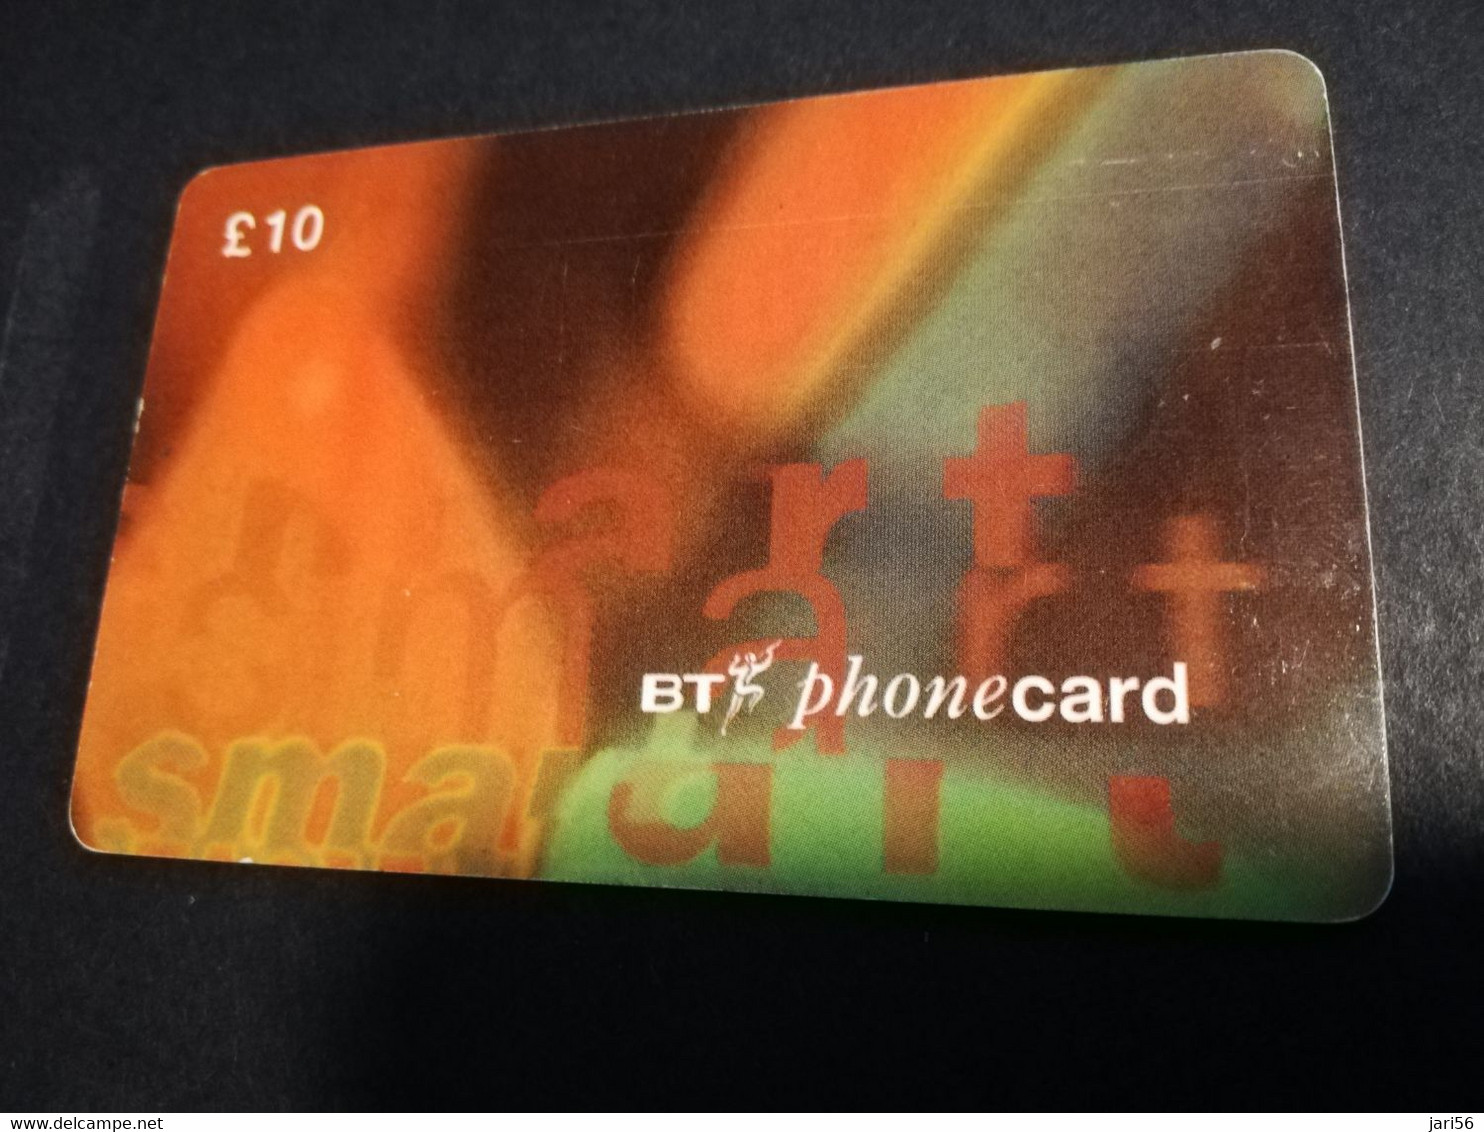 GREAT BRETAGNE  CHIPCARDS / TEST CARD 10 POUND    EXPIRY DATE 09/96   PERFECT  CONDITION     **4597** - BT Generales